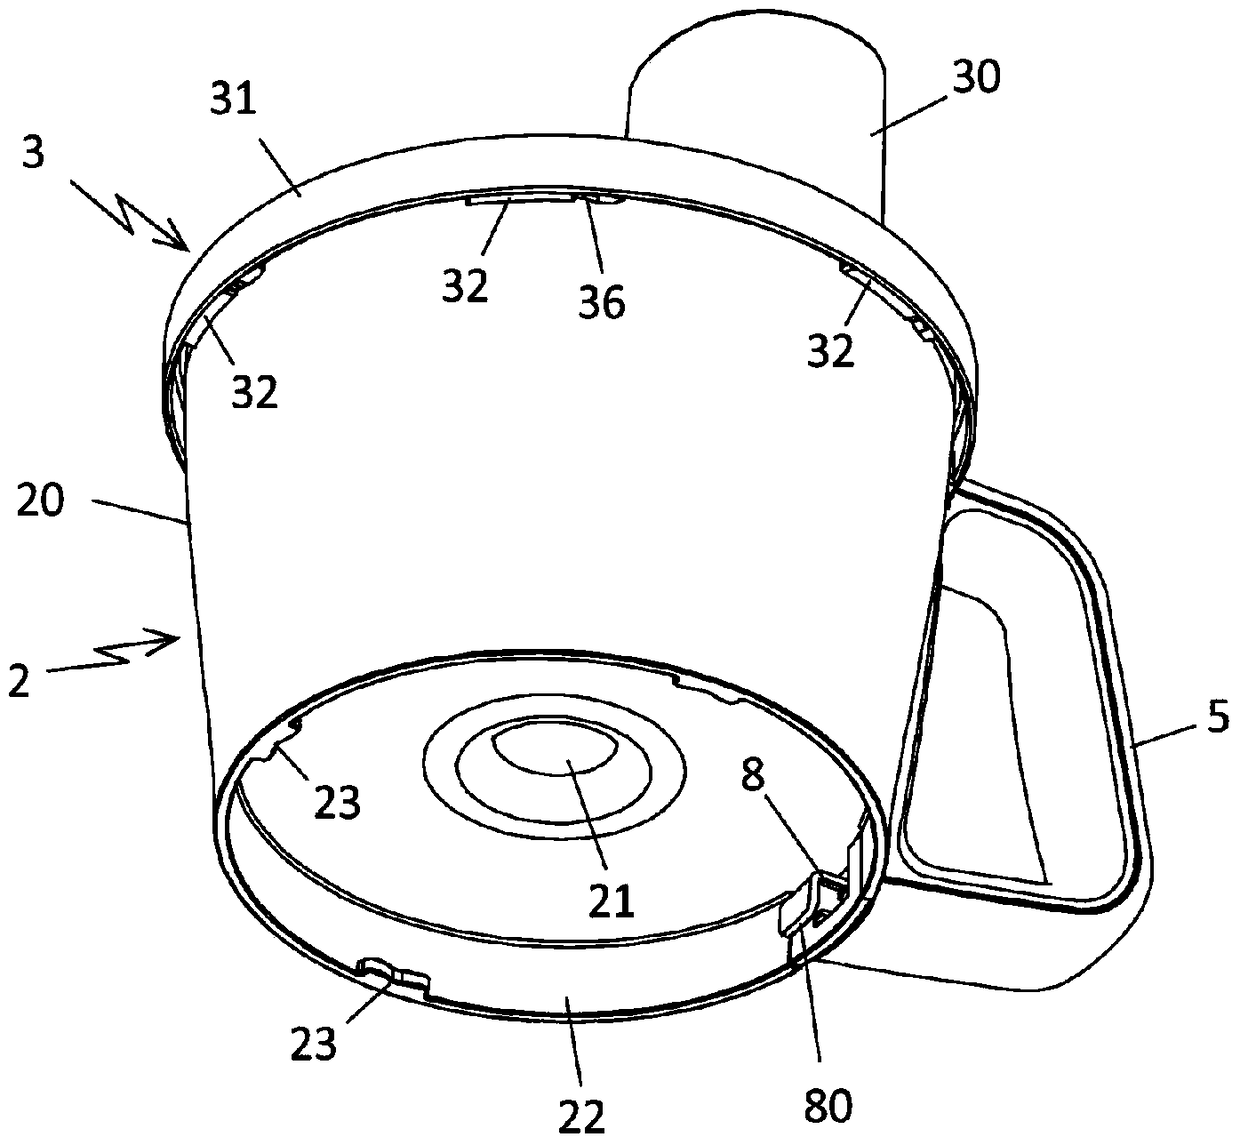 Cooking and preparation appliance comprising a container closed by a detachable lid cooperating with a safety device